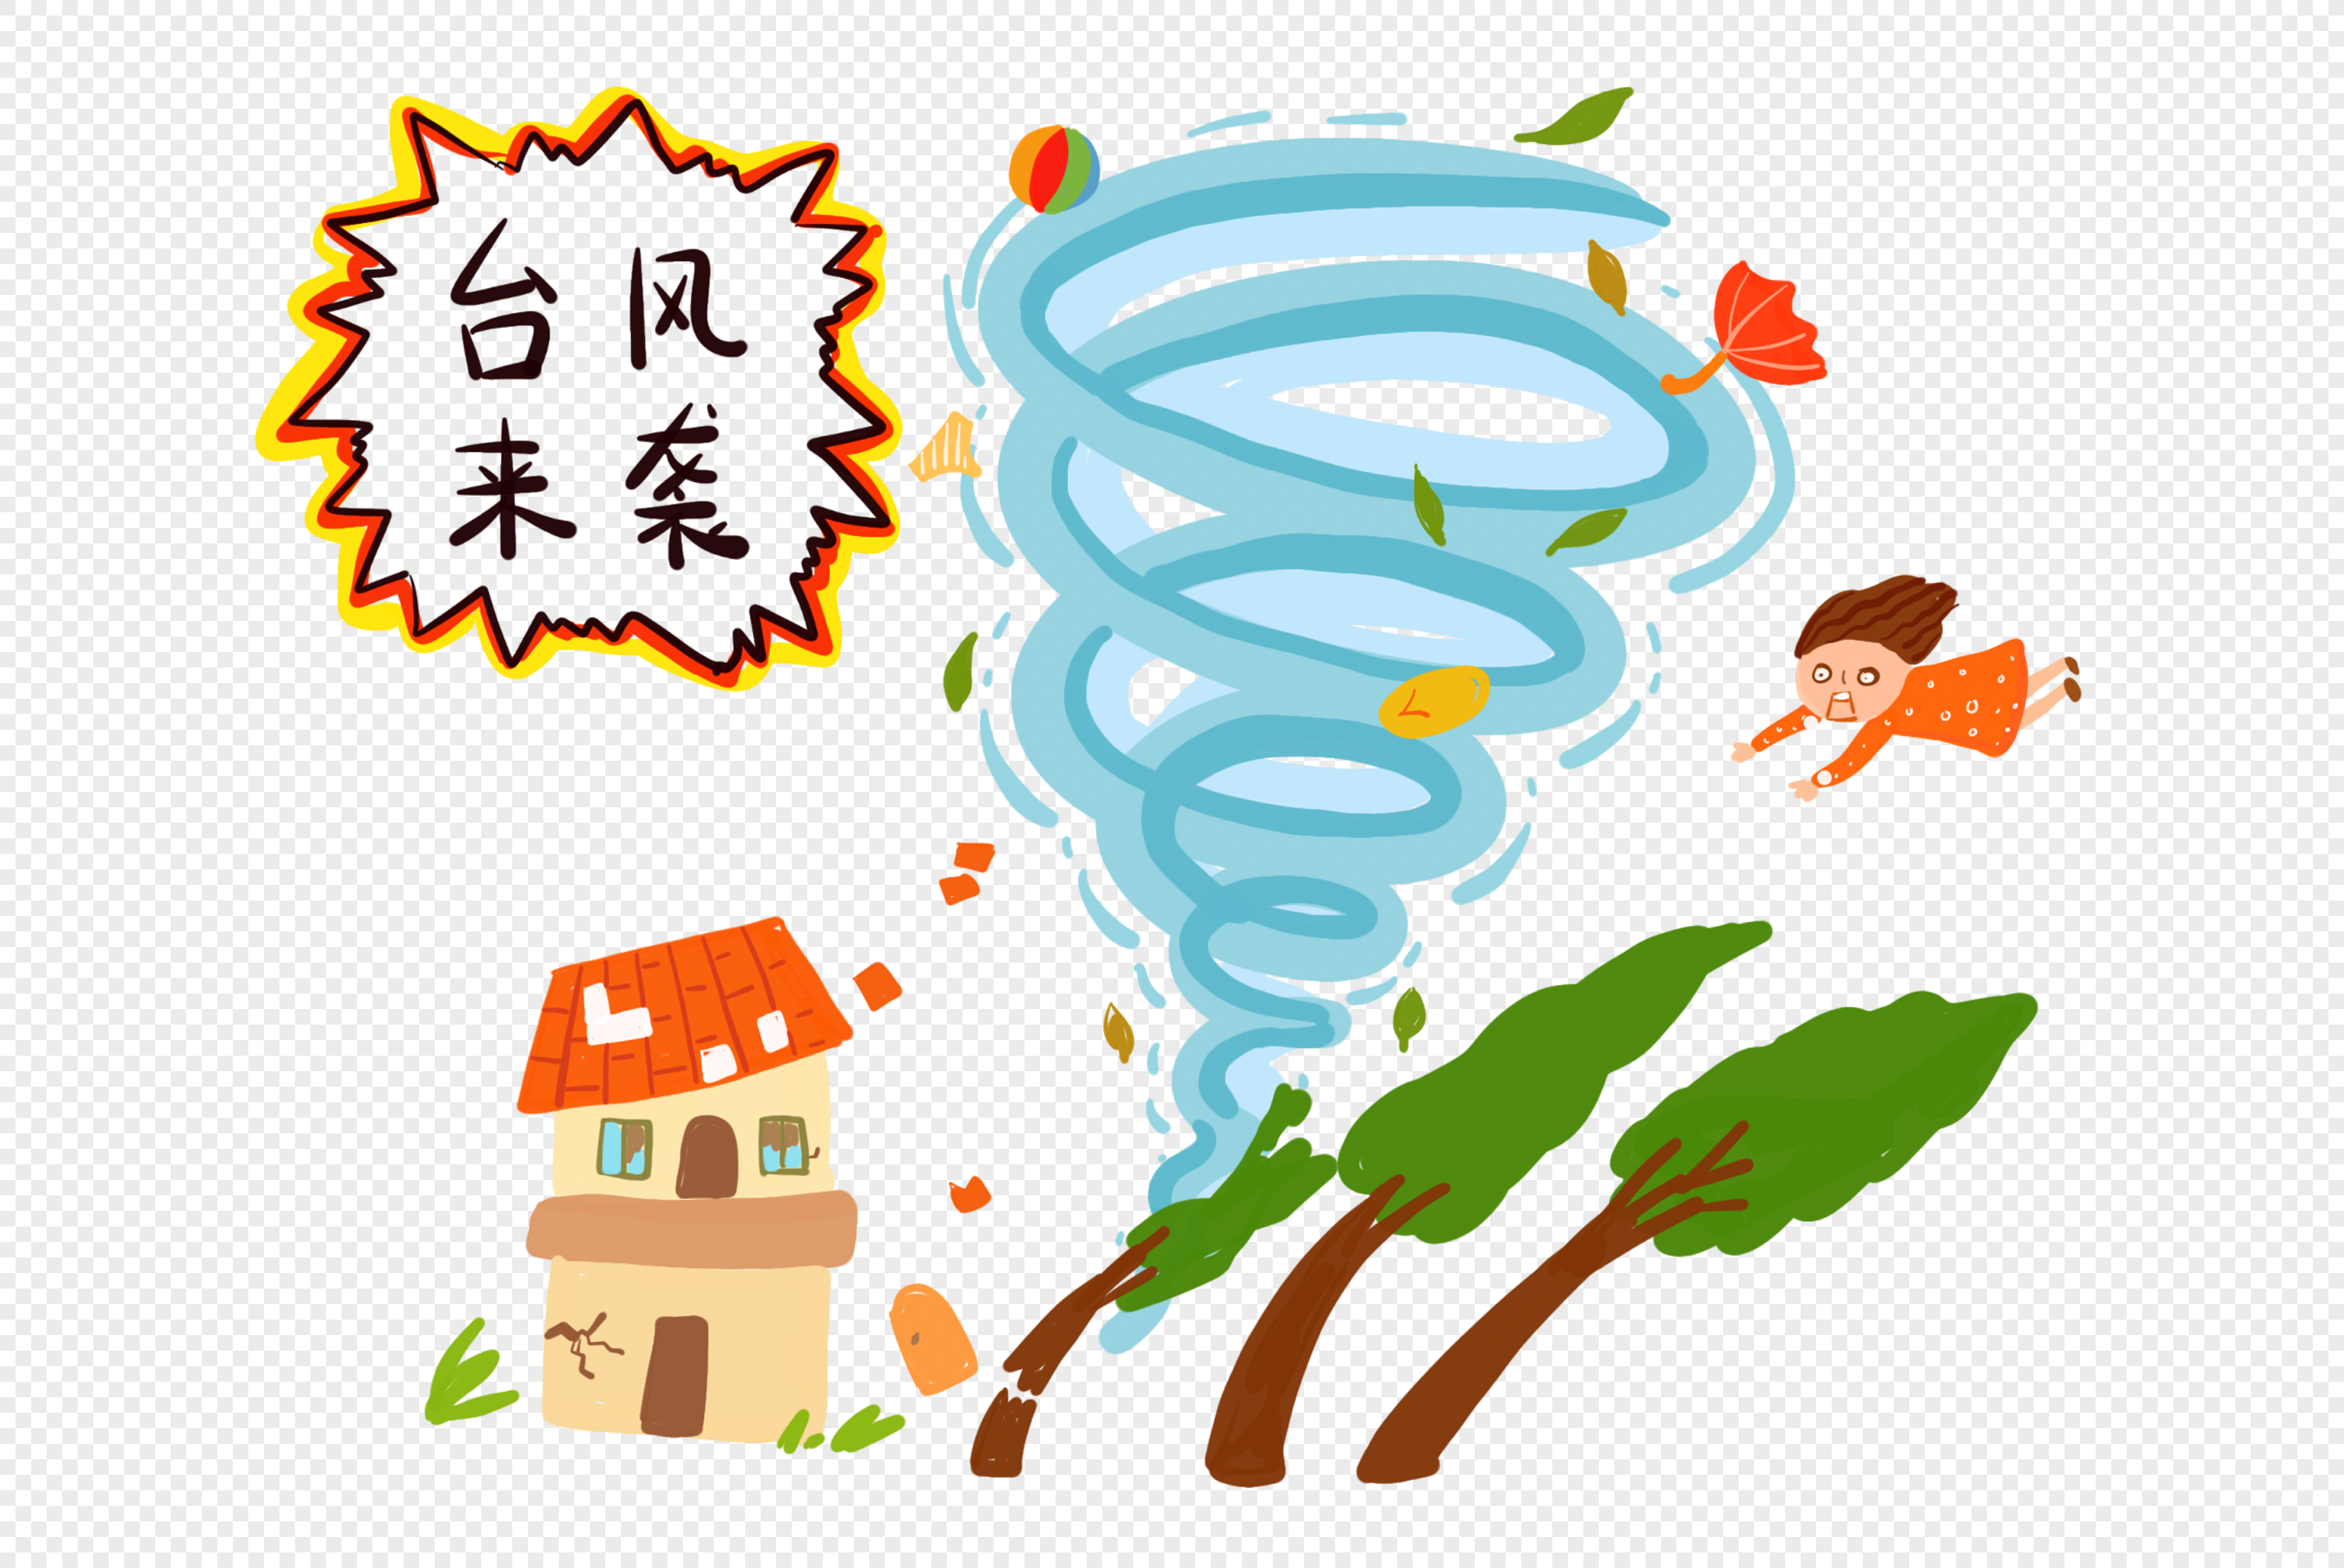 Windy Weather PNG Picture, Windy Weather Meteorological Illustration ...